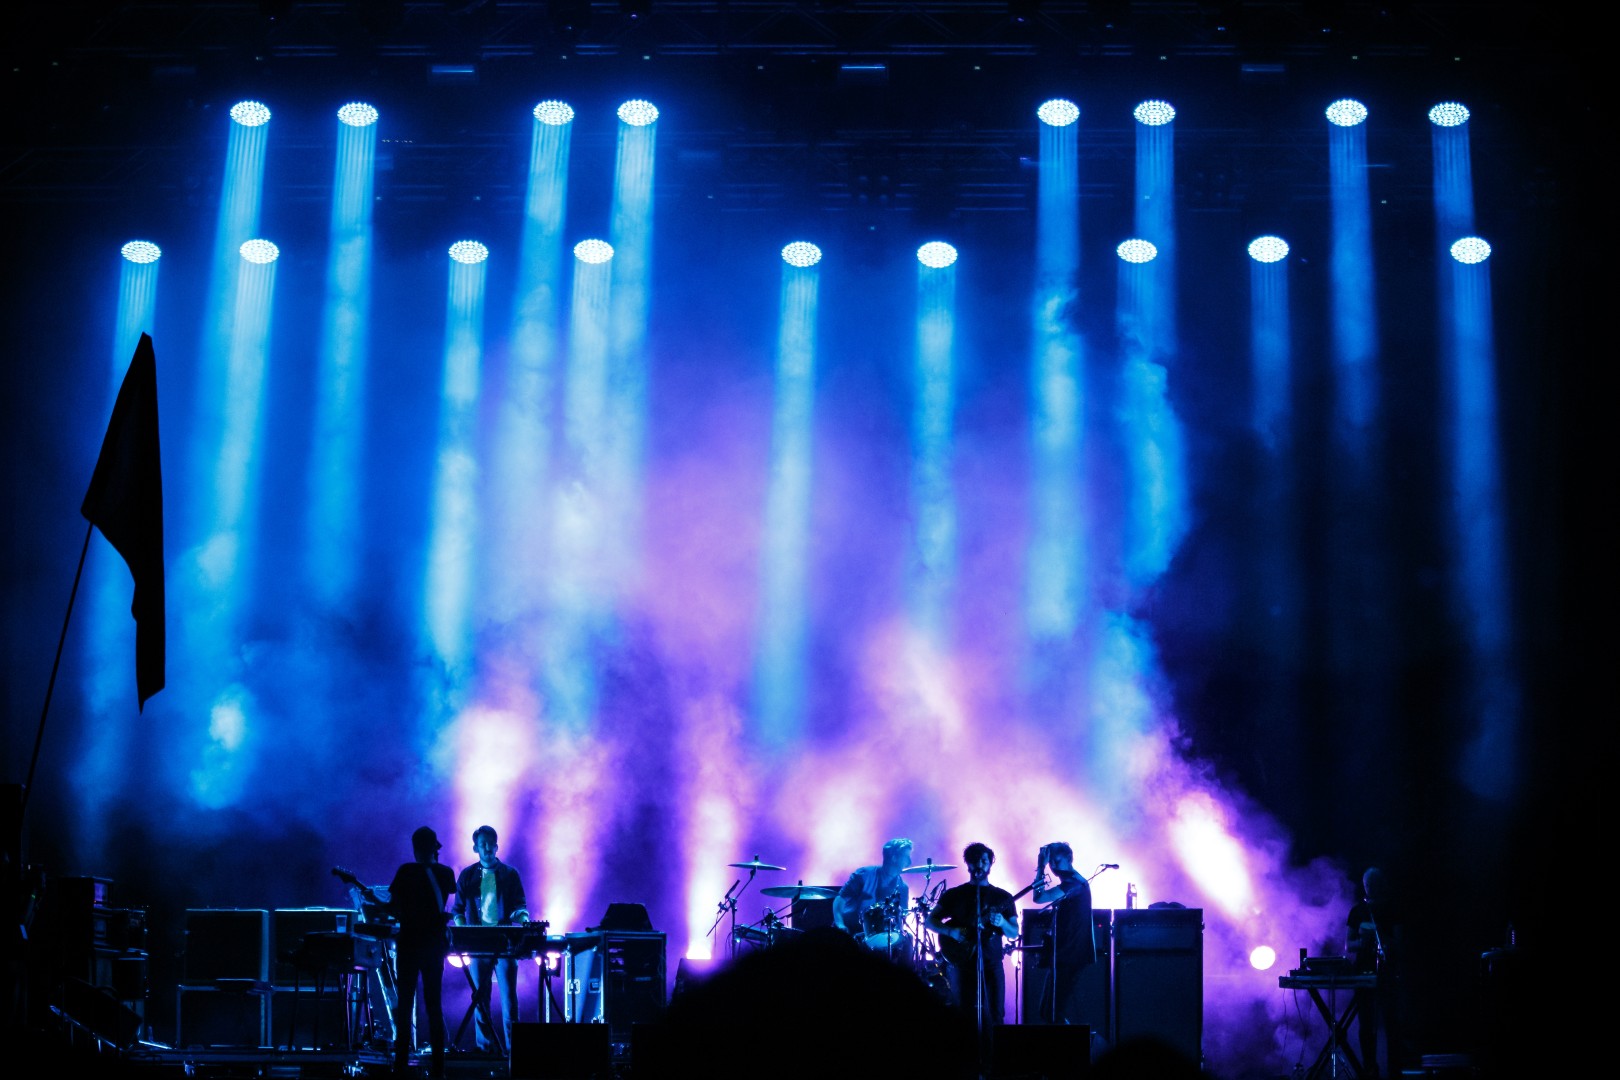 Foals at Domeniul Stirbey in Buftea on August 8, 2015 (a4c27b2ad7)